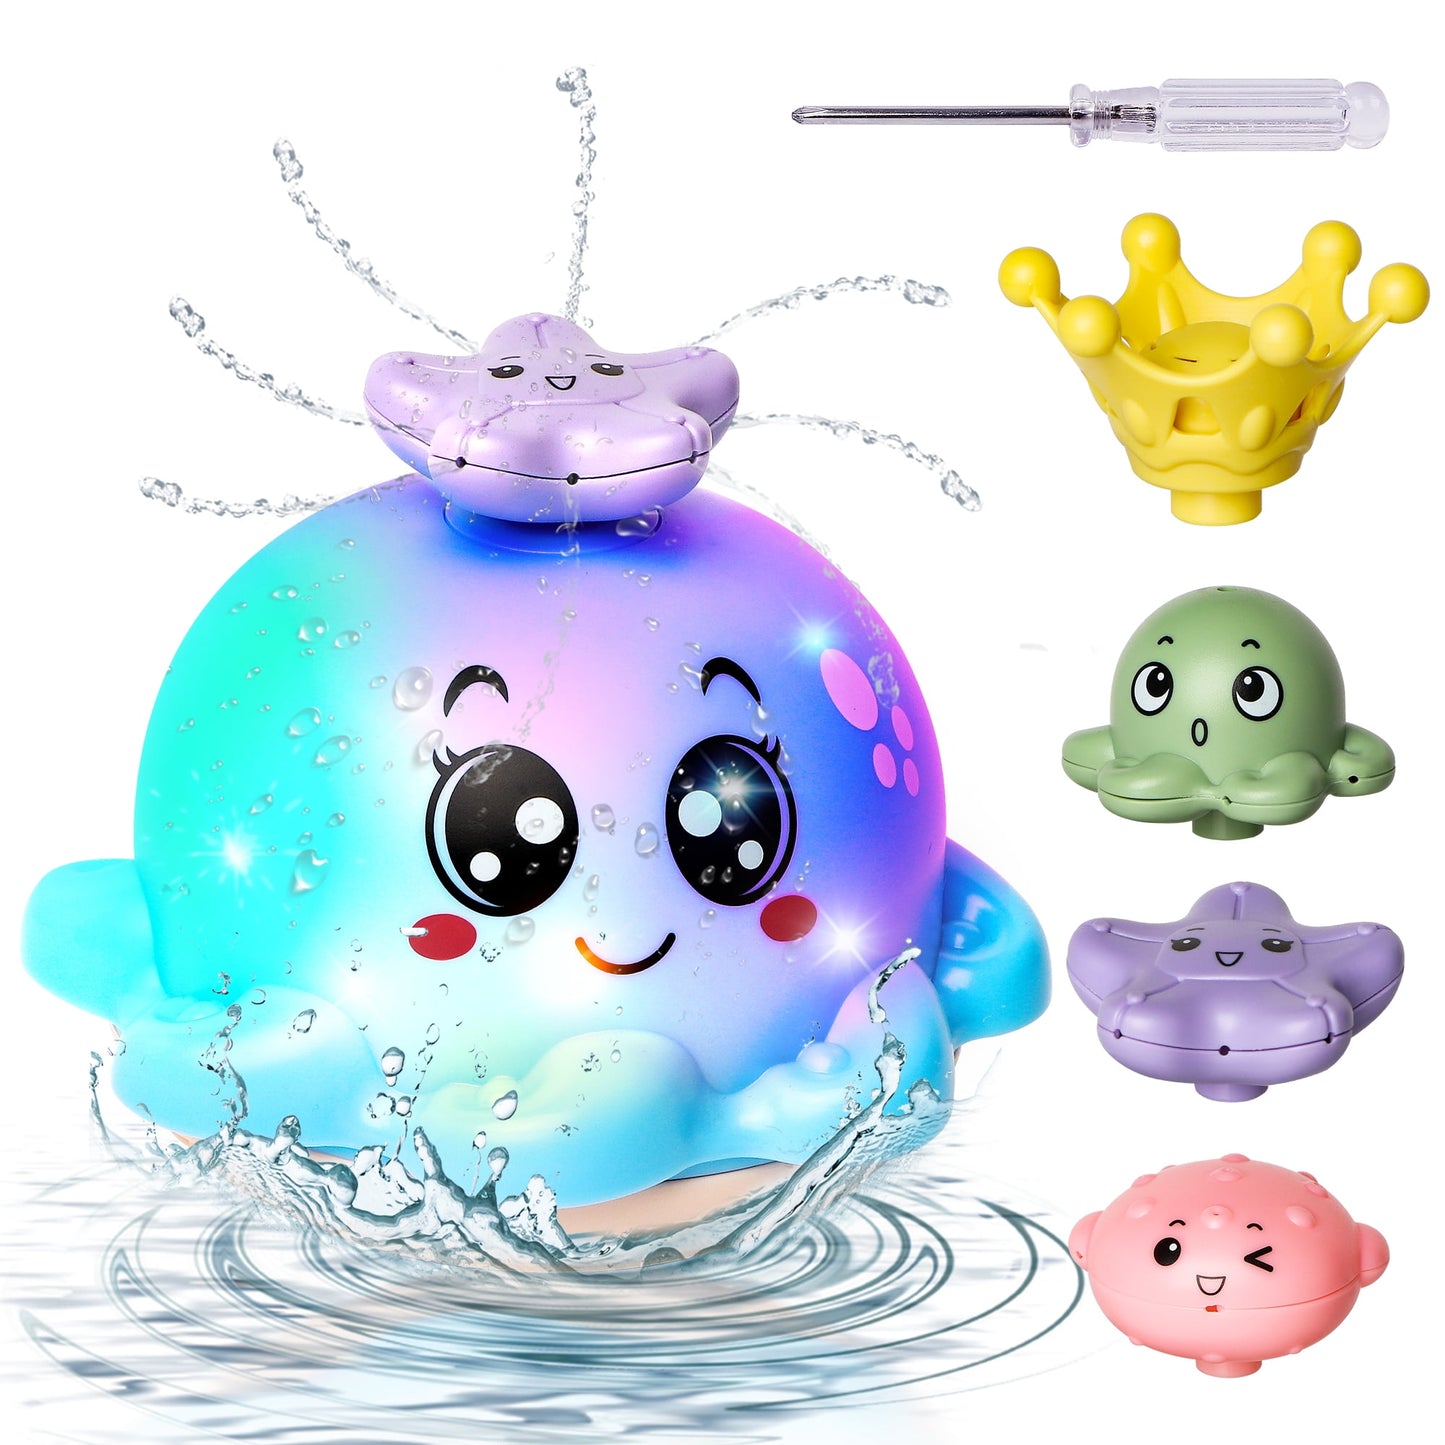 Octopus Baby Bath Toy for Kids, 4 Water Spray Modes Light-up Flashing Bathtub Toys for Toddler Boys Girls, Floatable Toys for Bathtub Swimming Pool